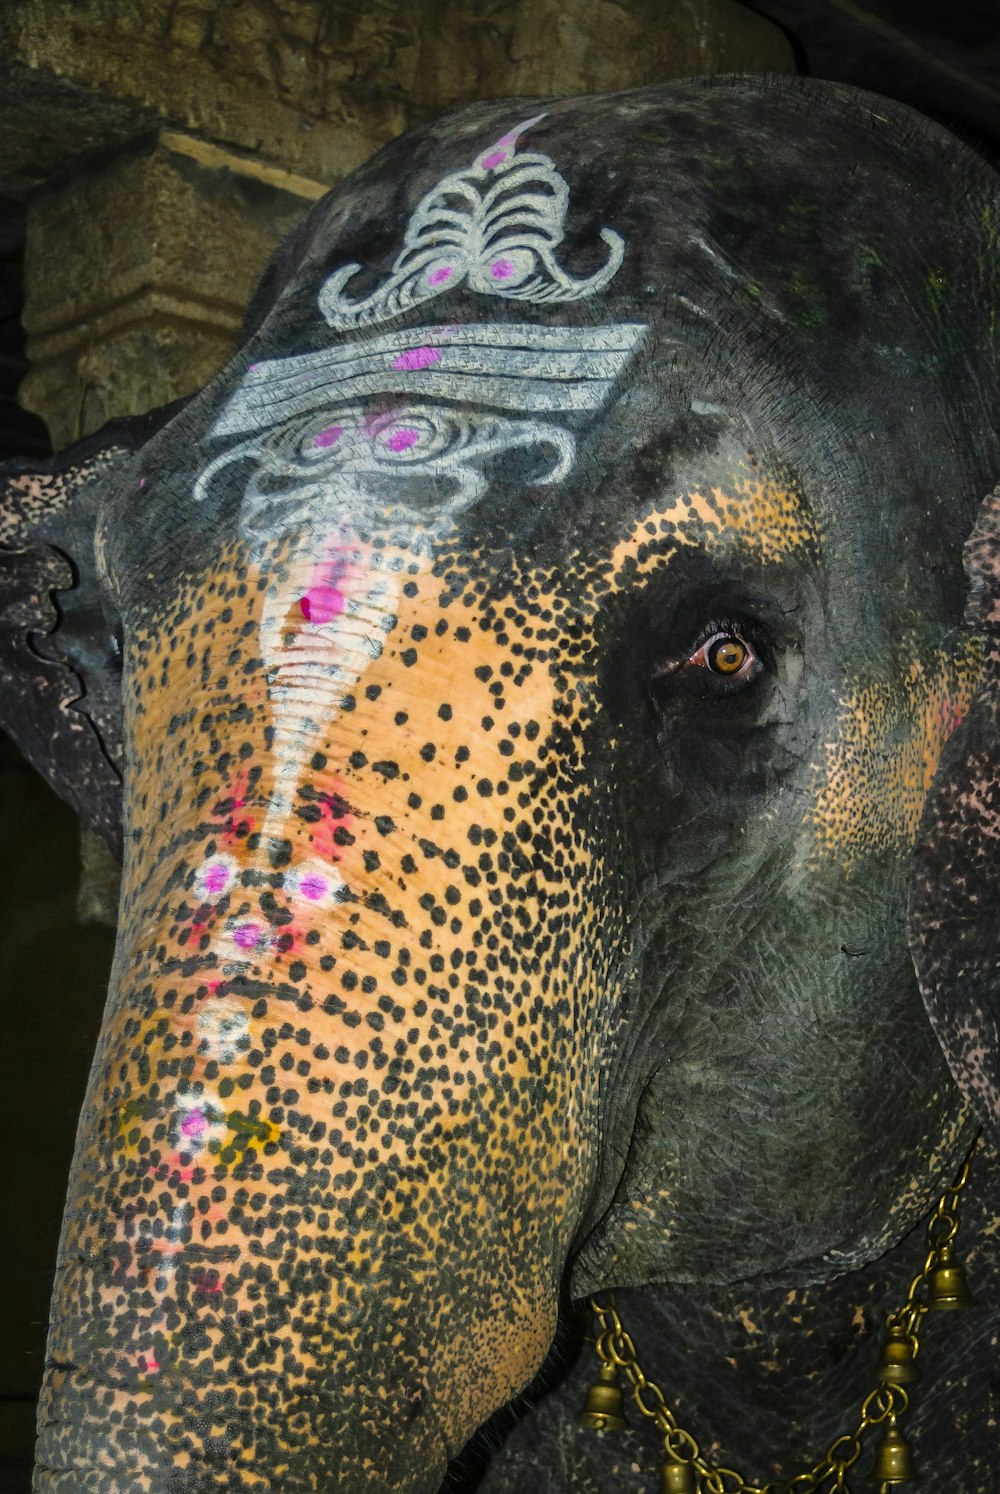 a close up of an elephant wearing a necklace